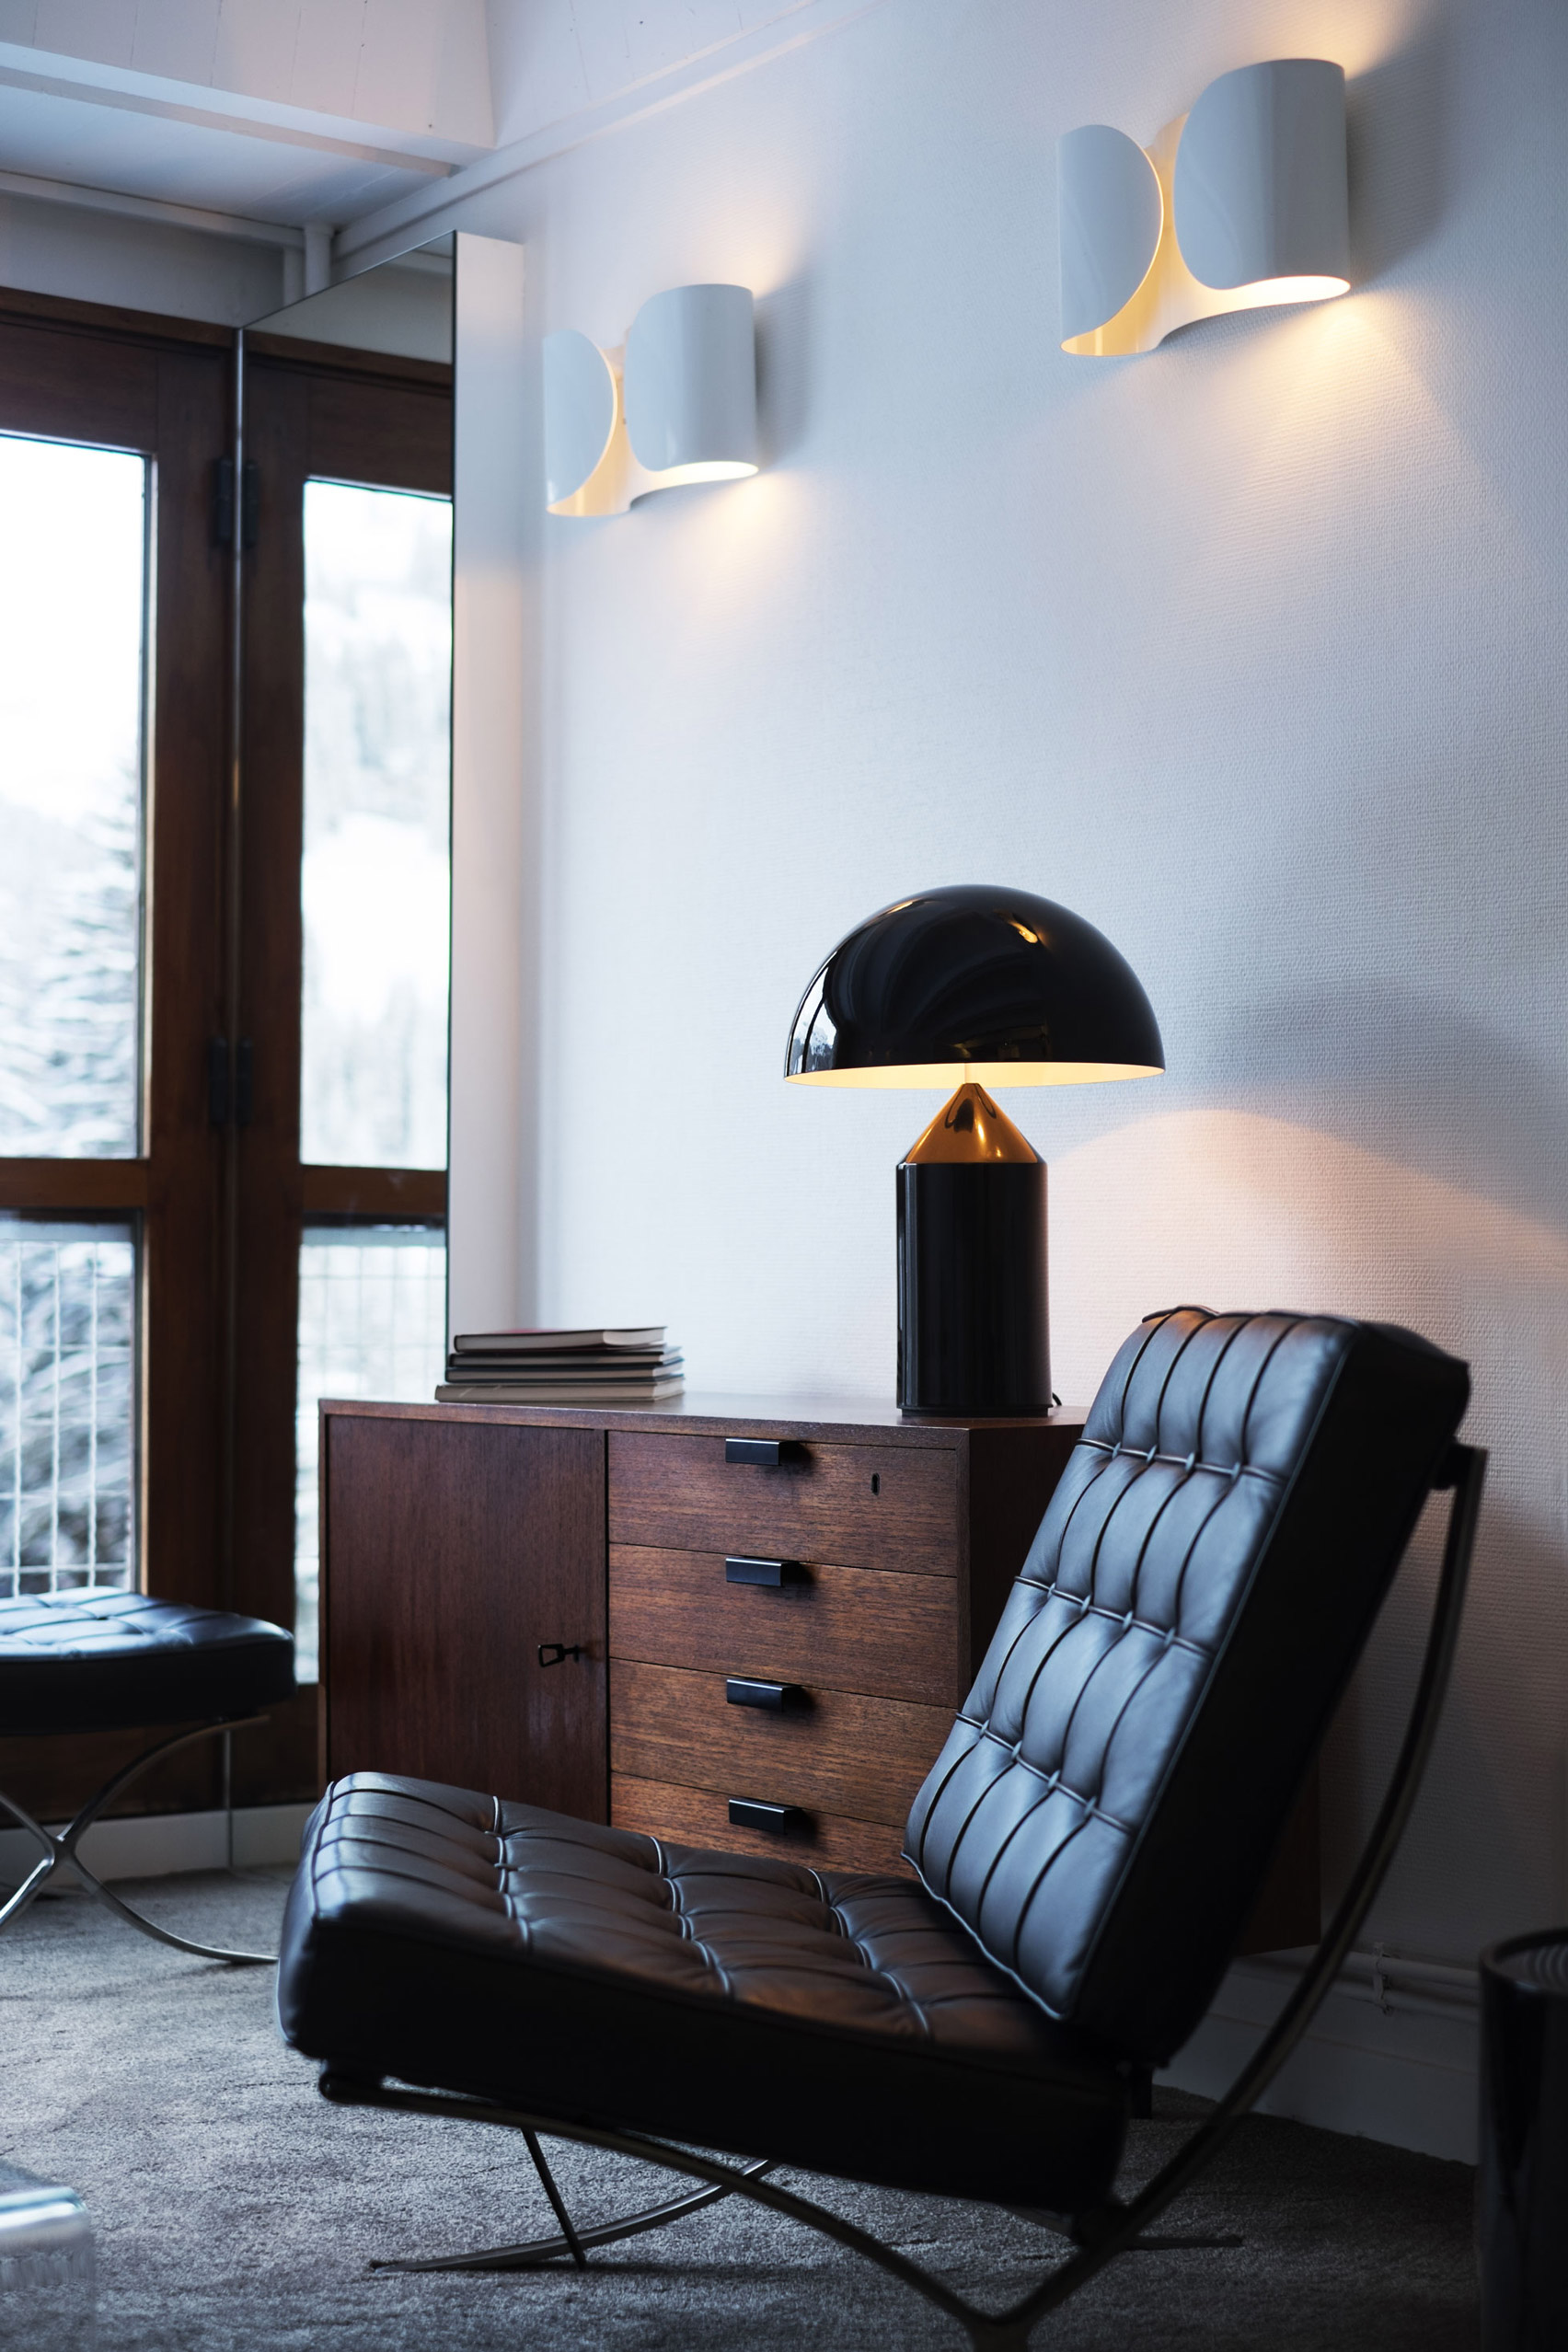 Interiors of Flaine apartment, revamped by Volta